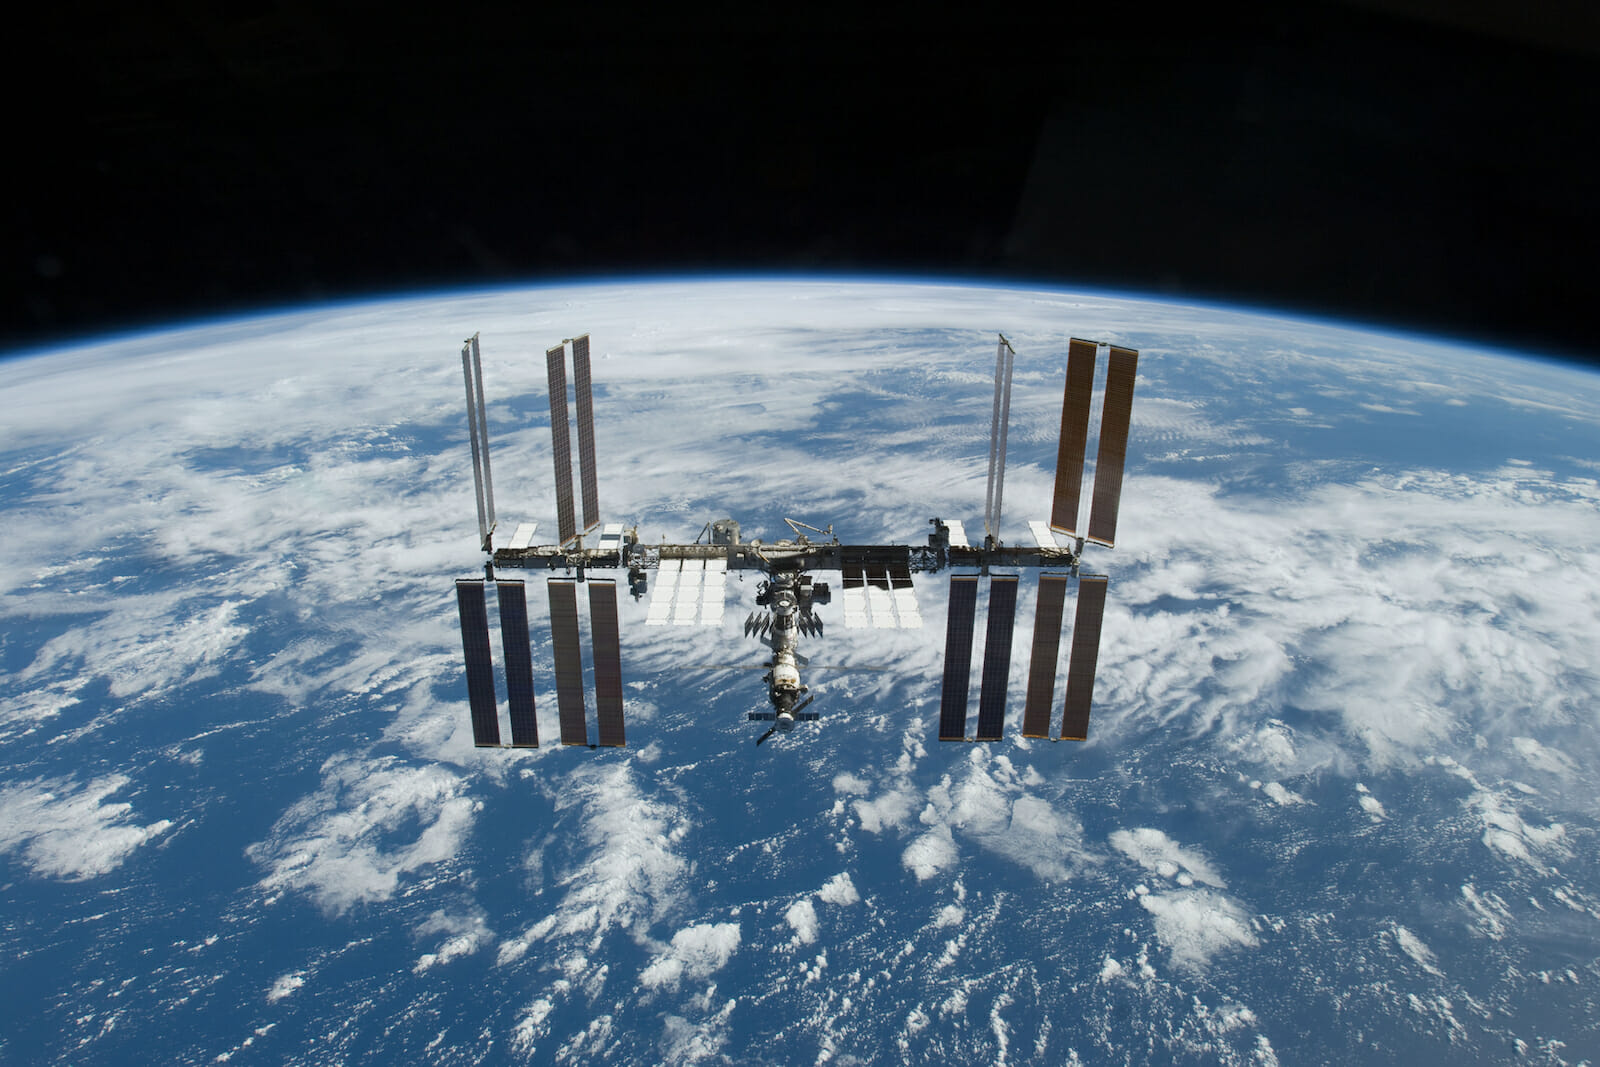 International Space Station in orbit above the Earth